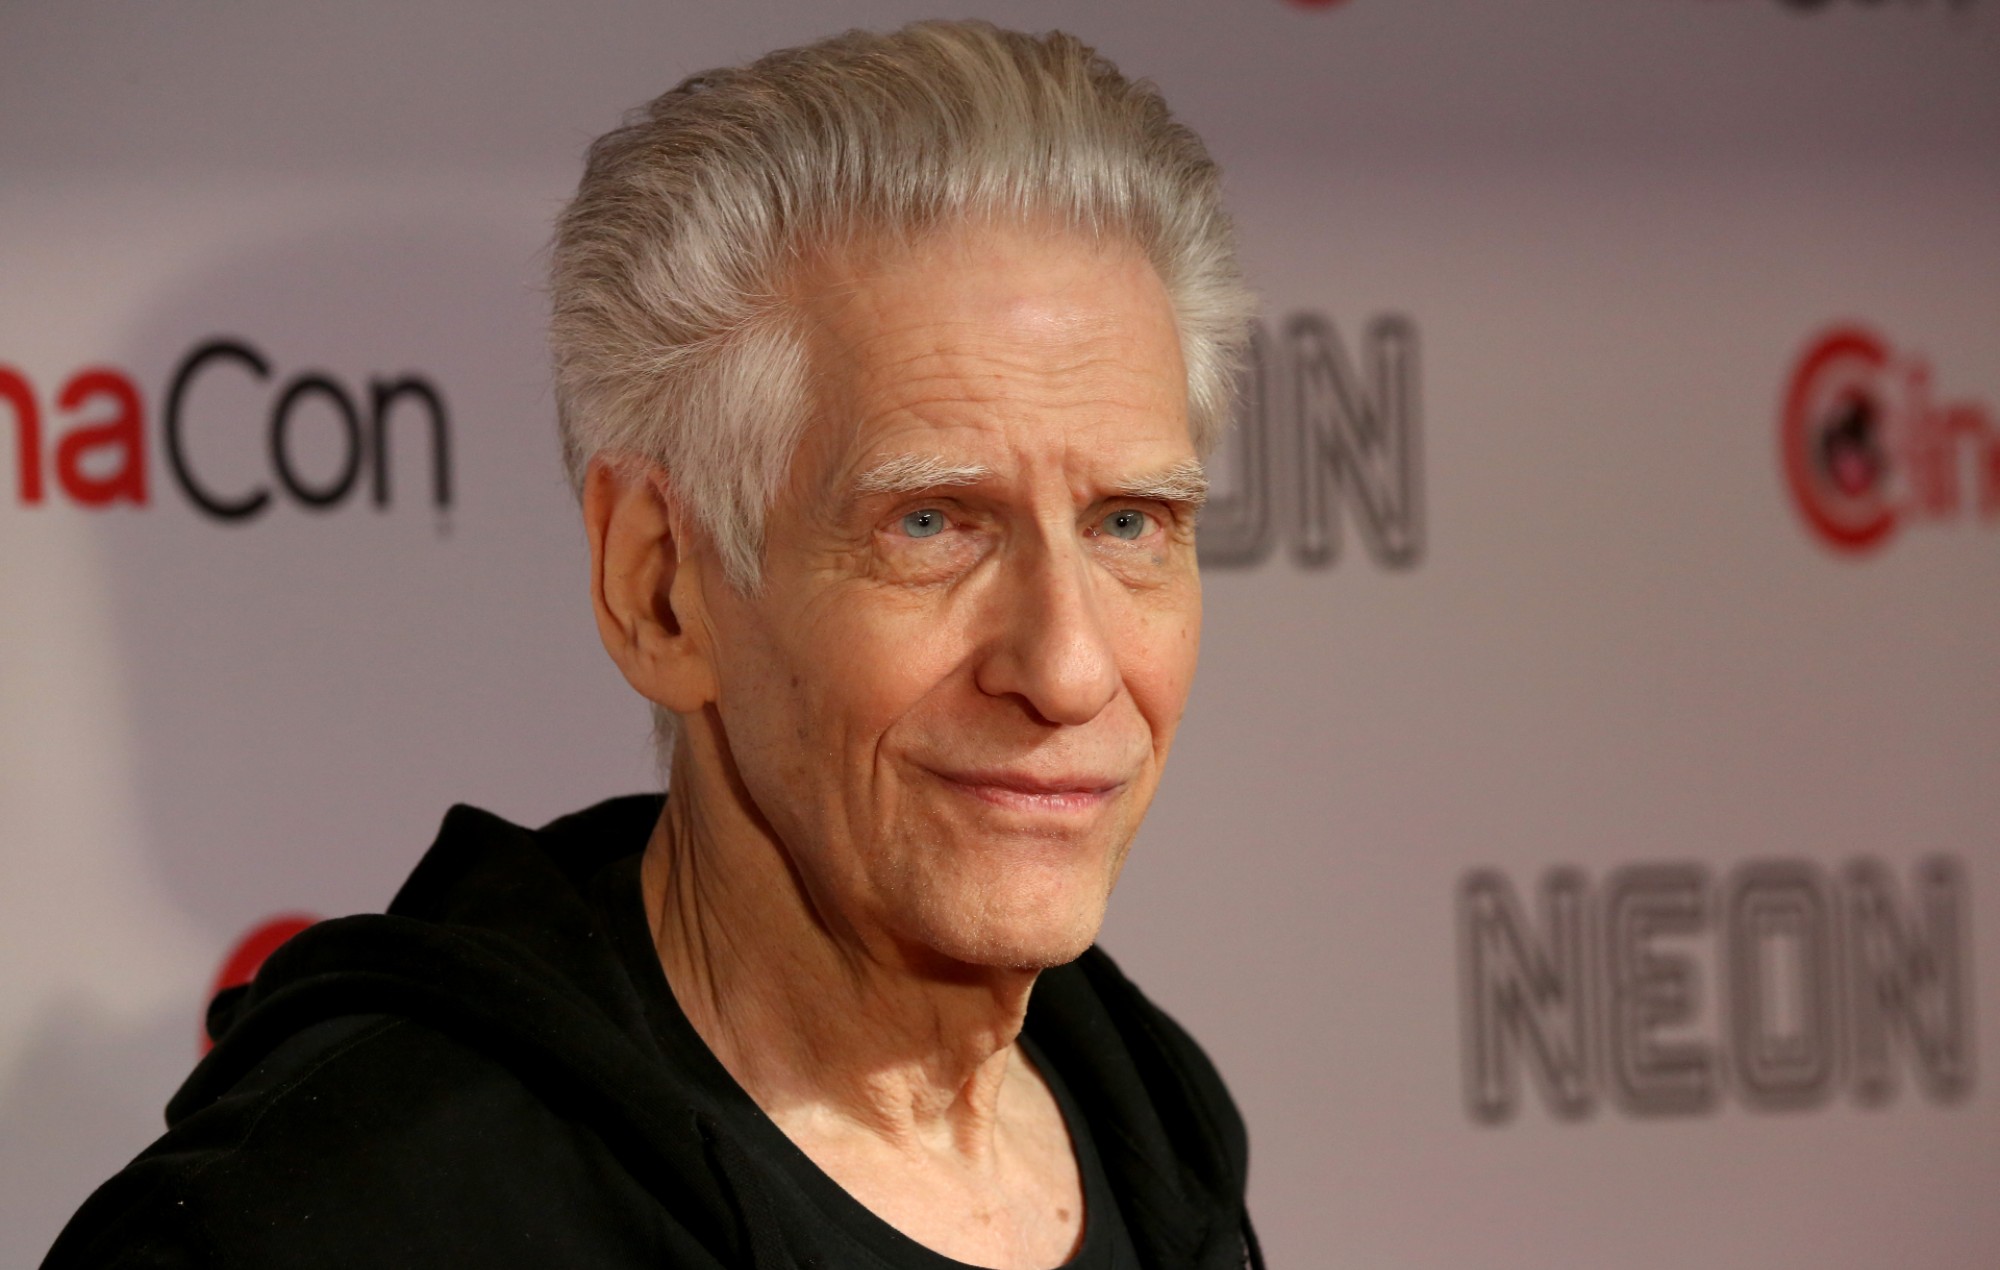 David Cronenberg is “expecting walkouts” during Cannes screening of 'Crimes Of The Future'